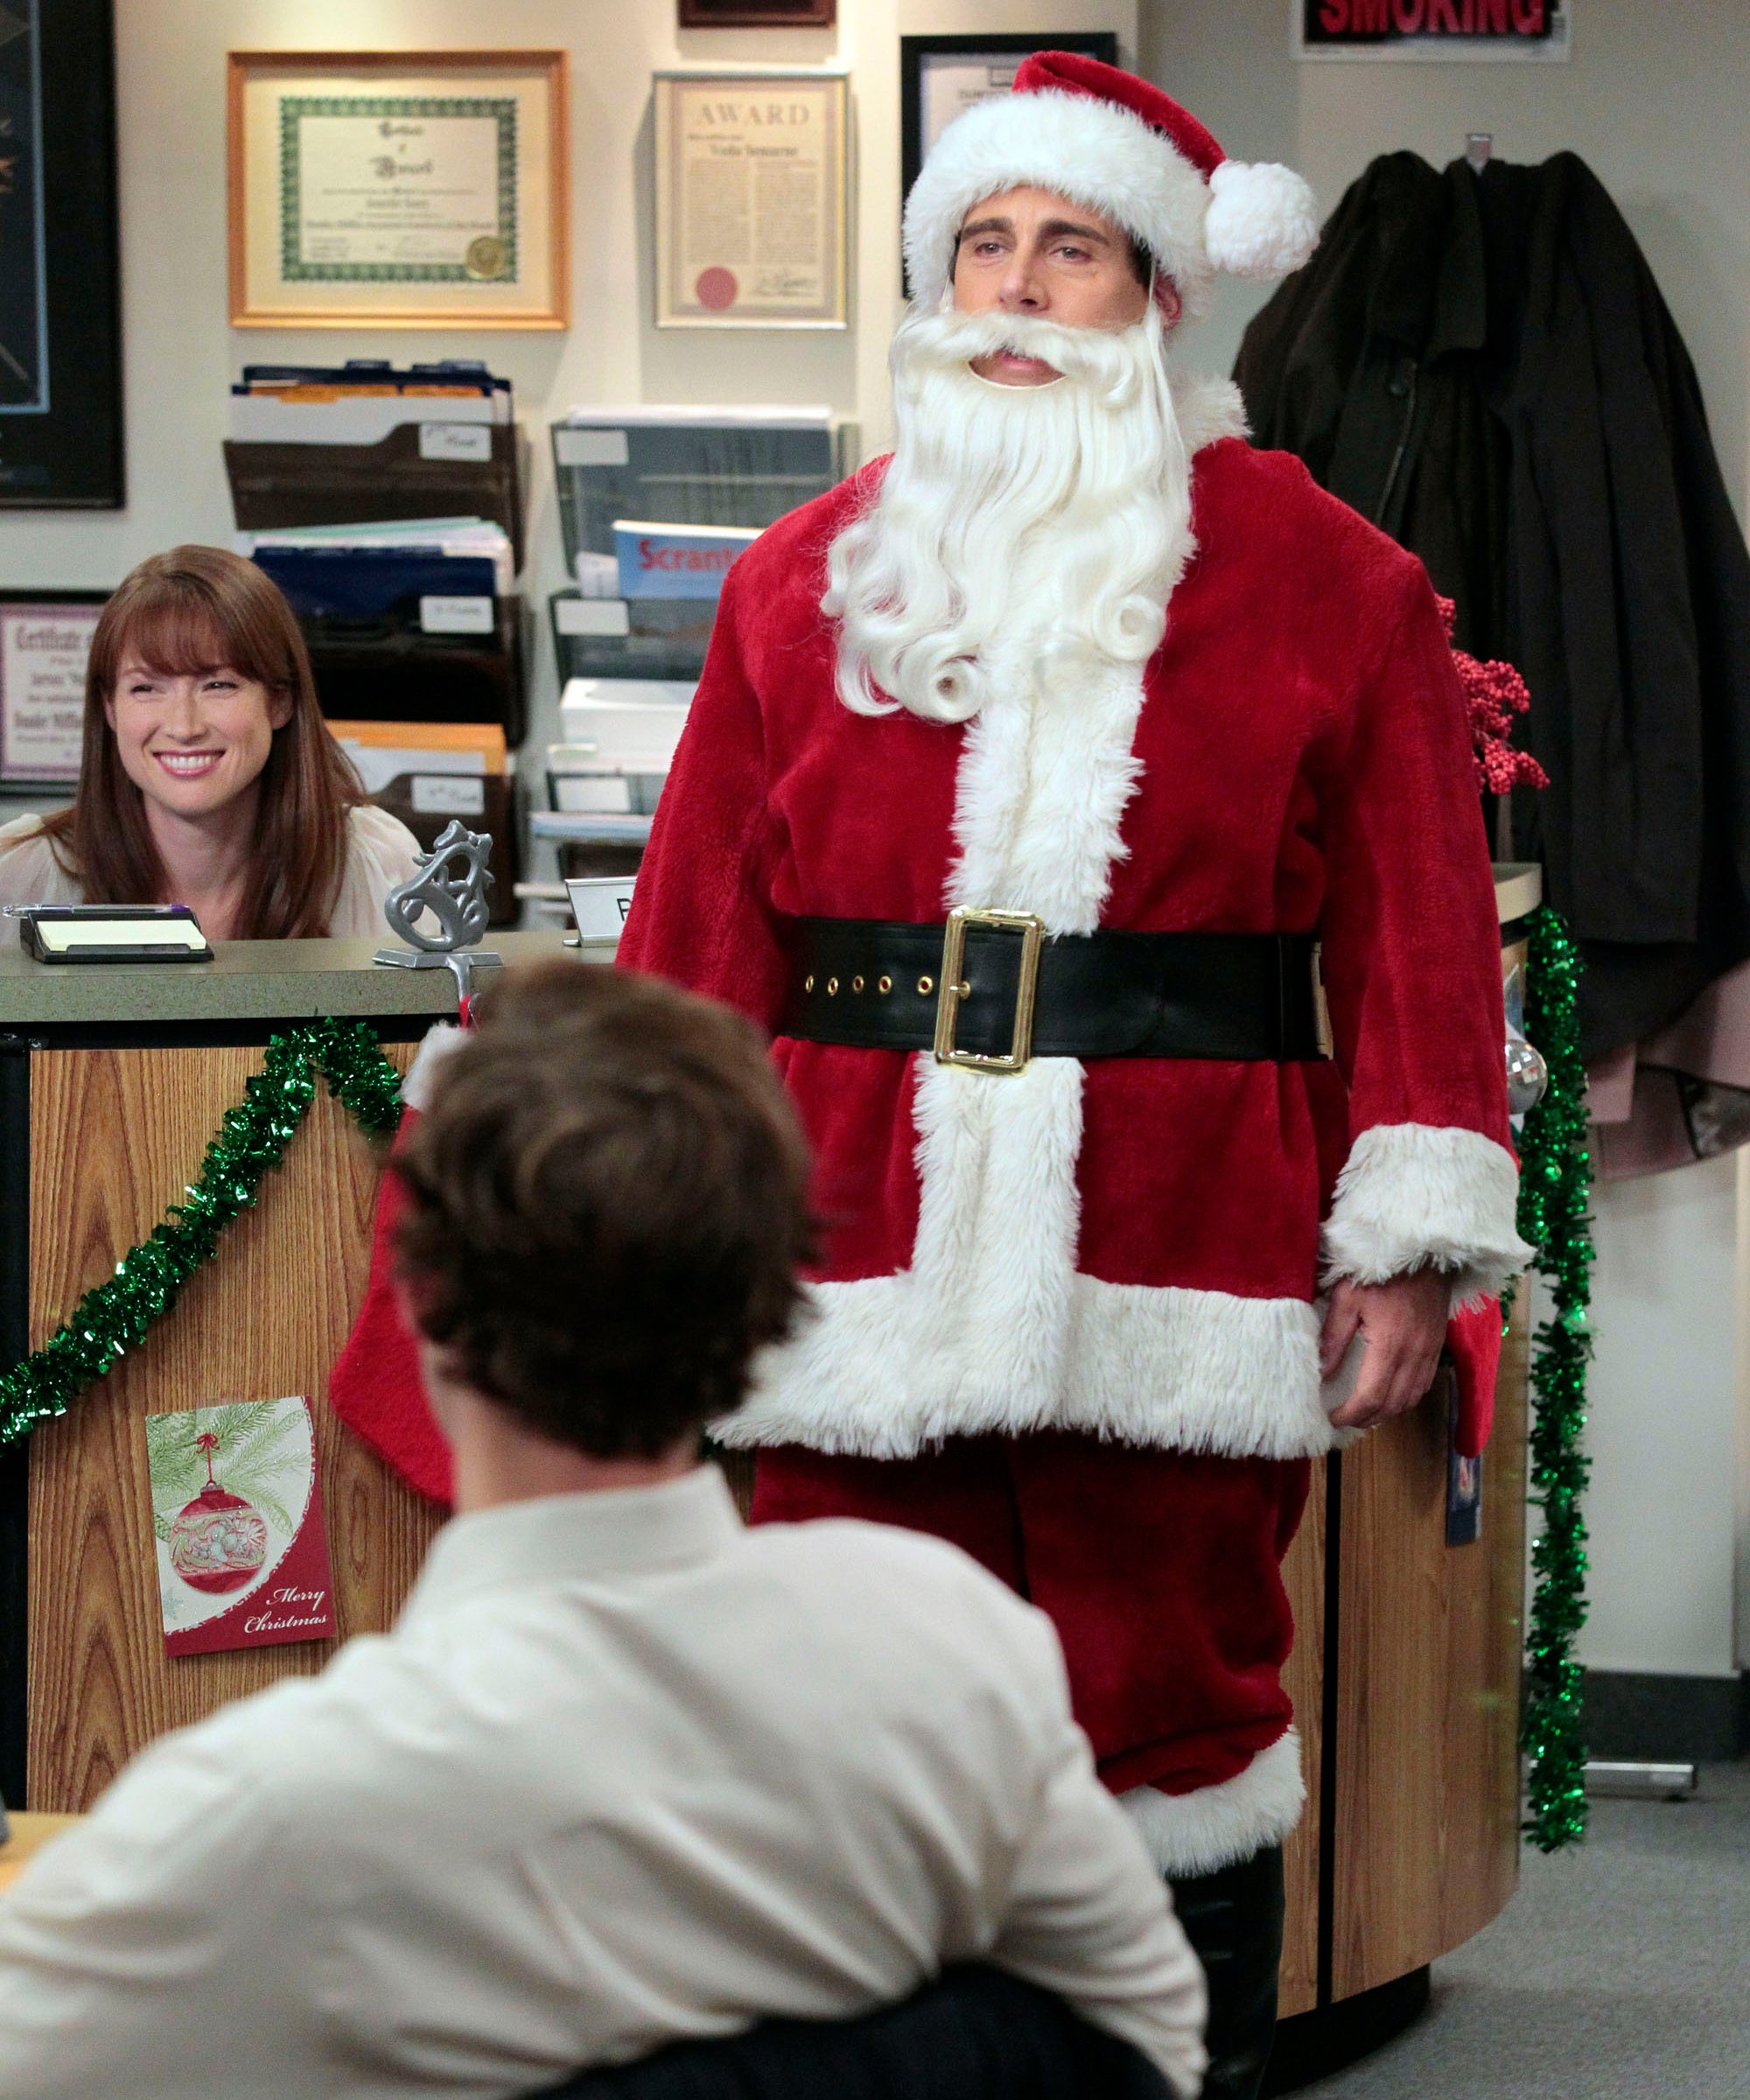 Every Single Christmas Episode Of The Office Ranked